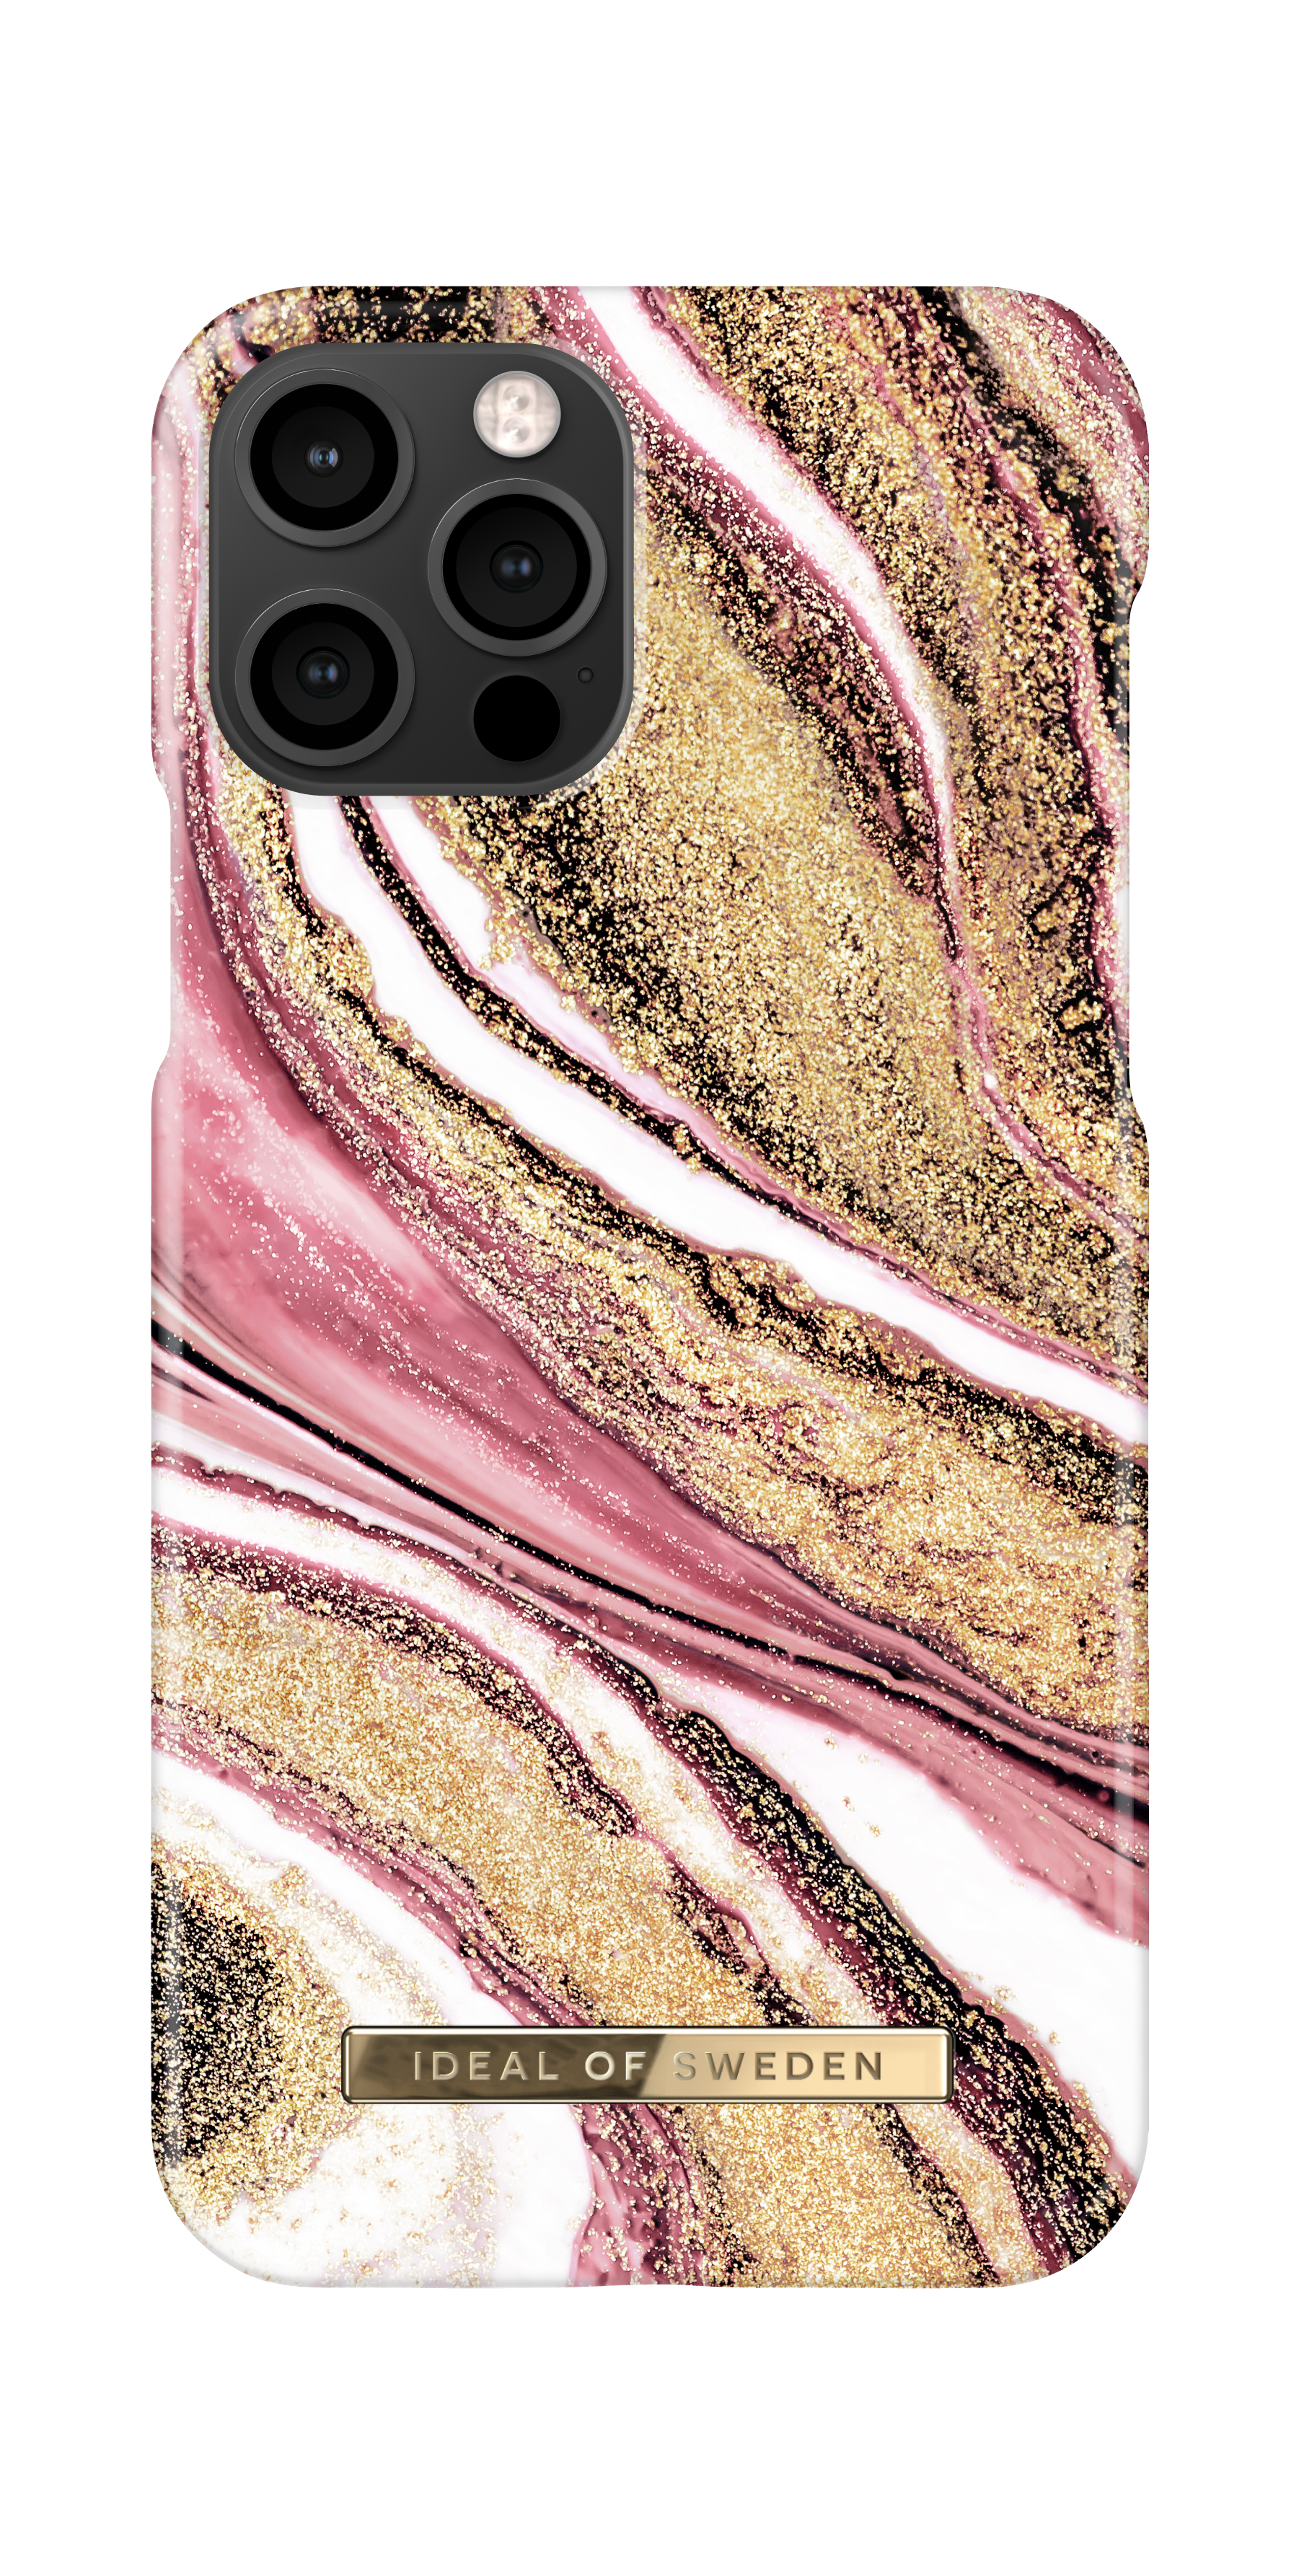 IDEAL OF SWEDEN 12 iPhone IDFCSS20-I2061-193, 12, Pro, Apple, iPhone Backcover, Cosmic Pink Swirl